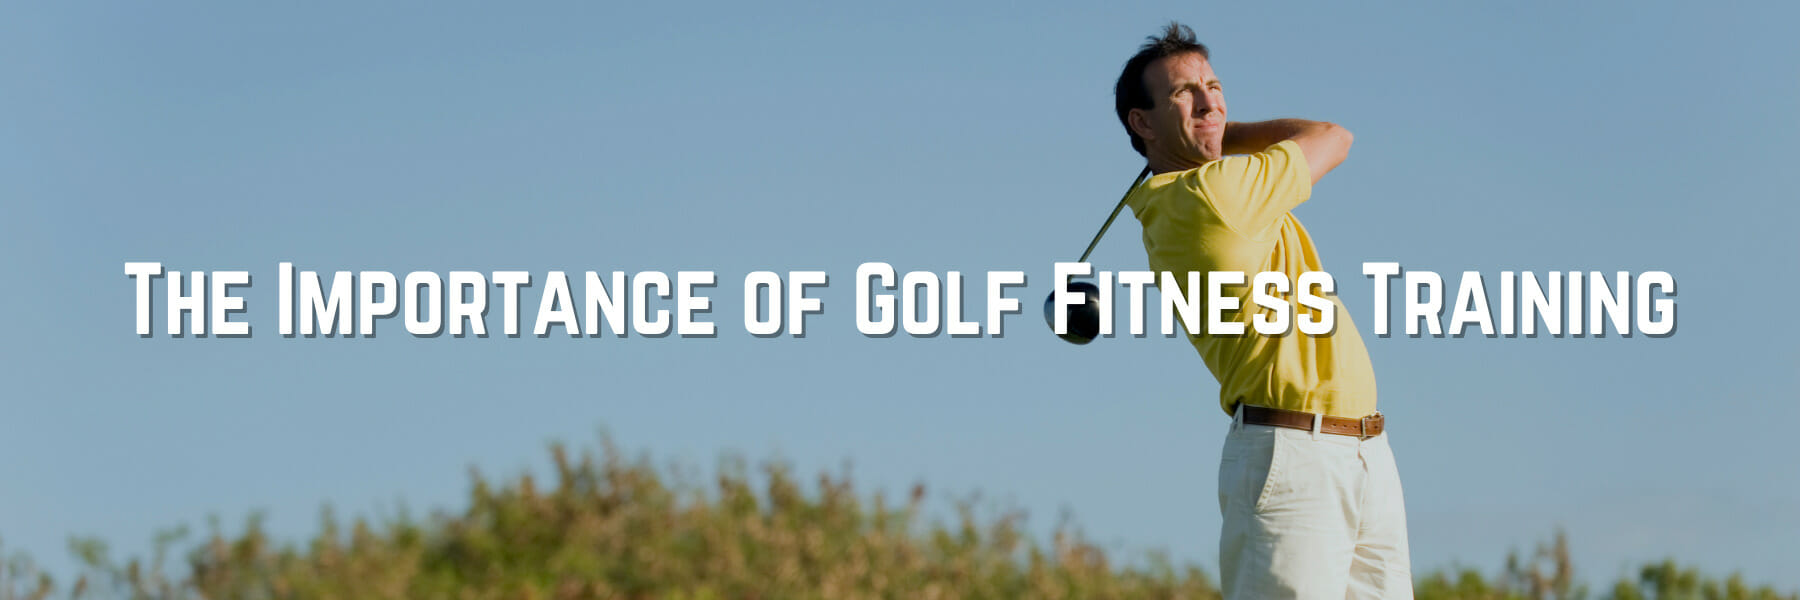 The Importance of Golf Fitness Training